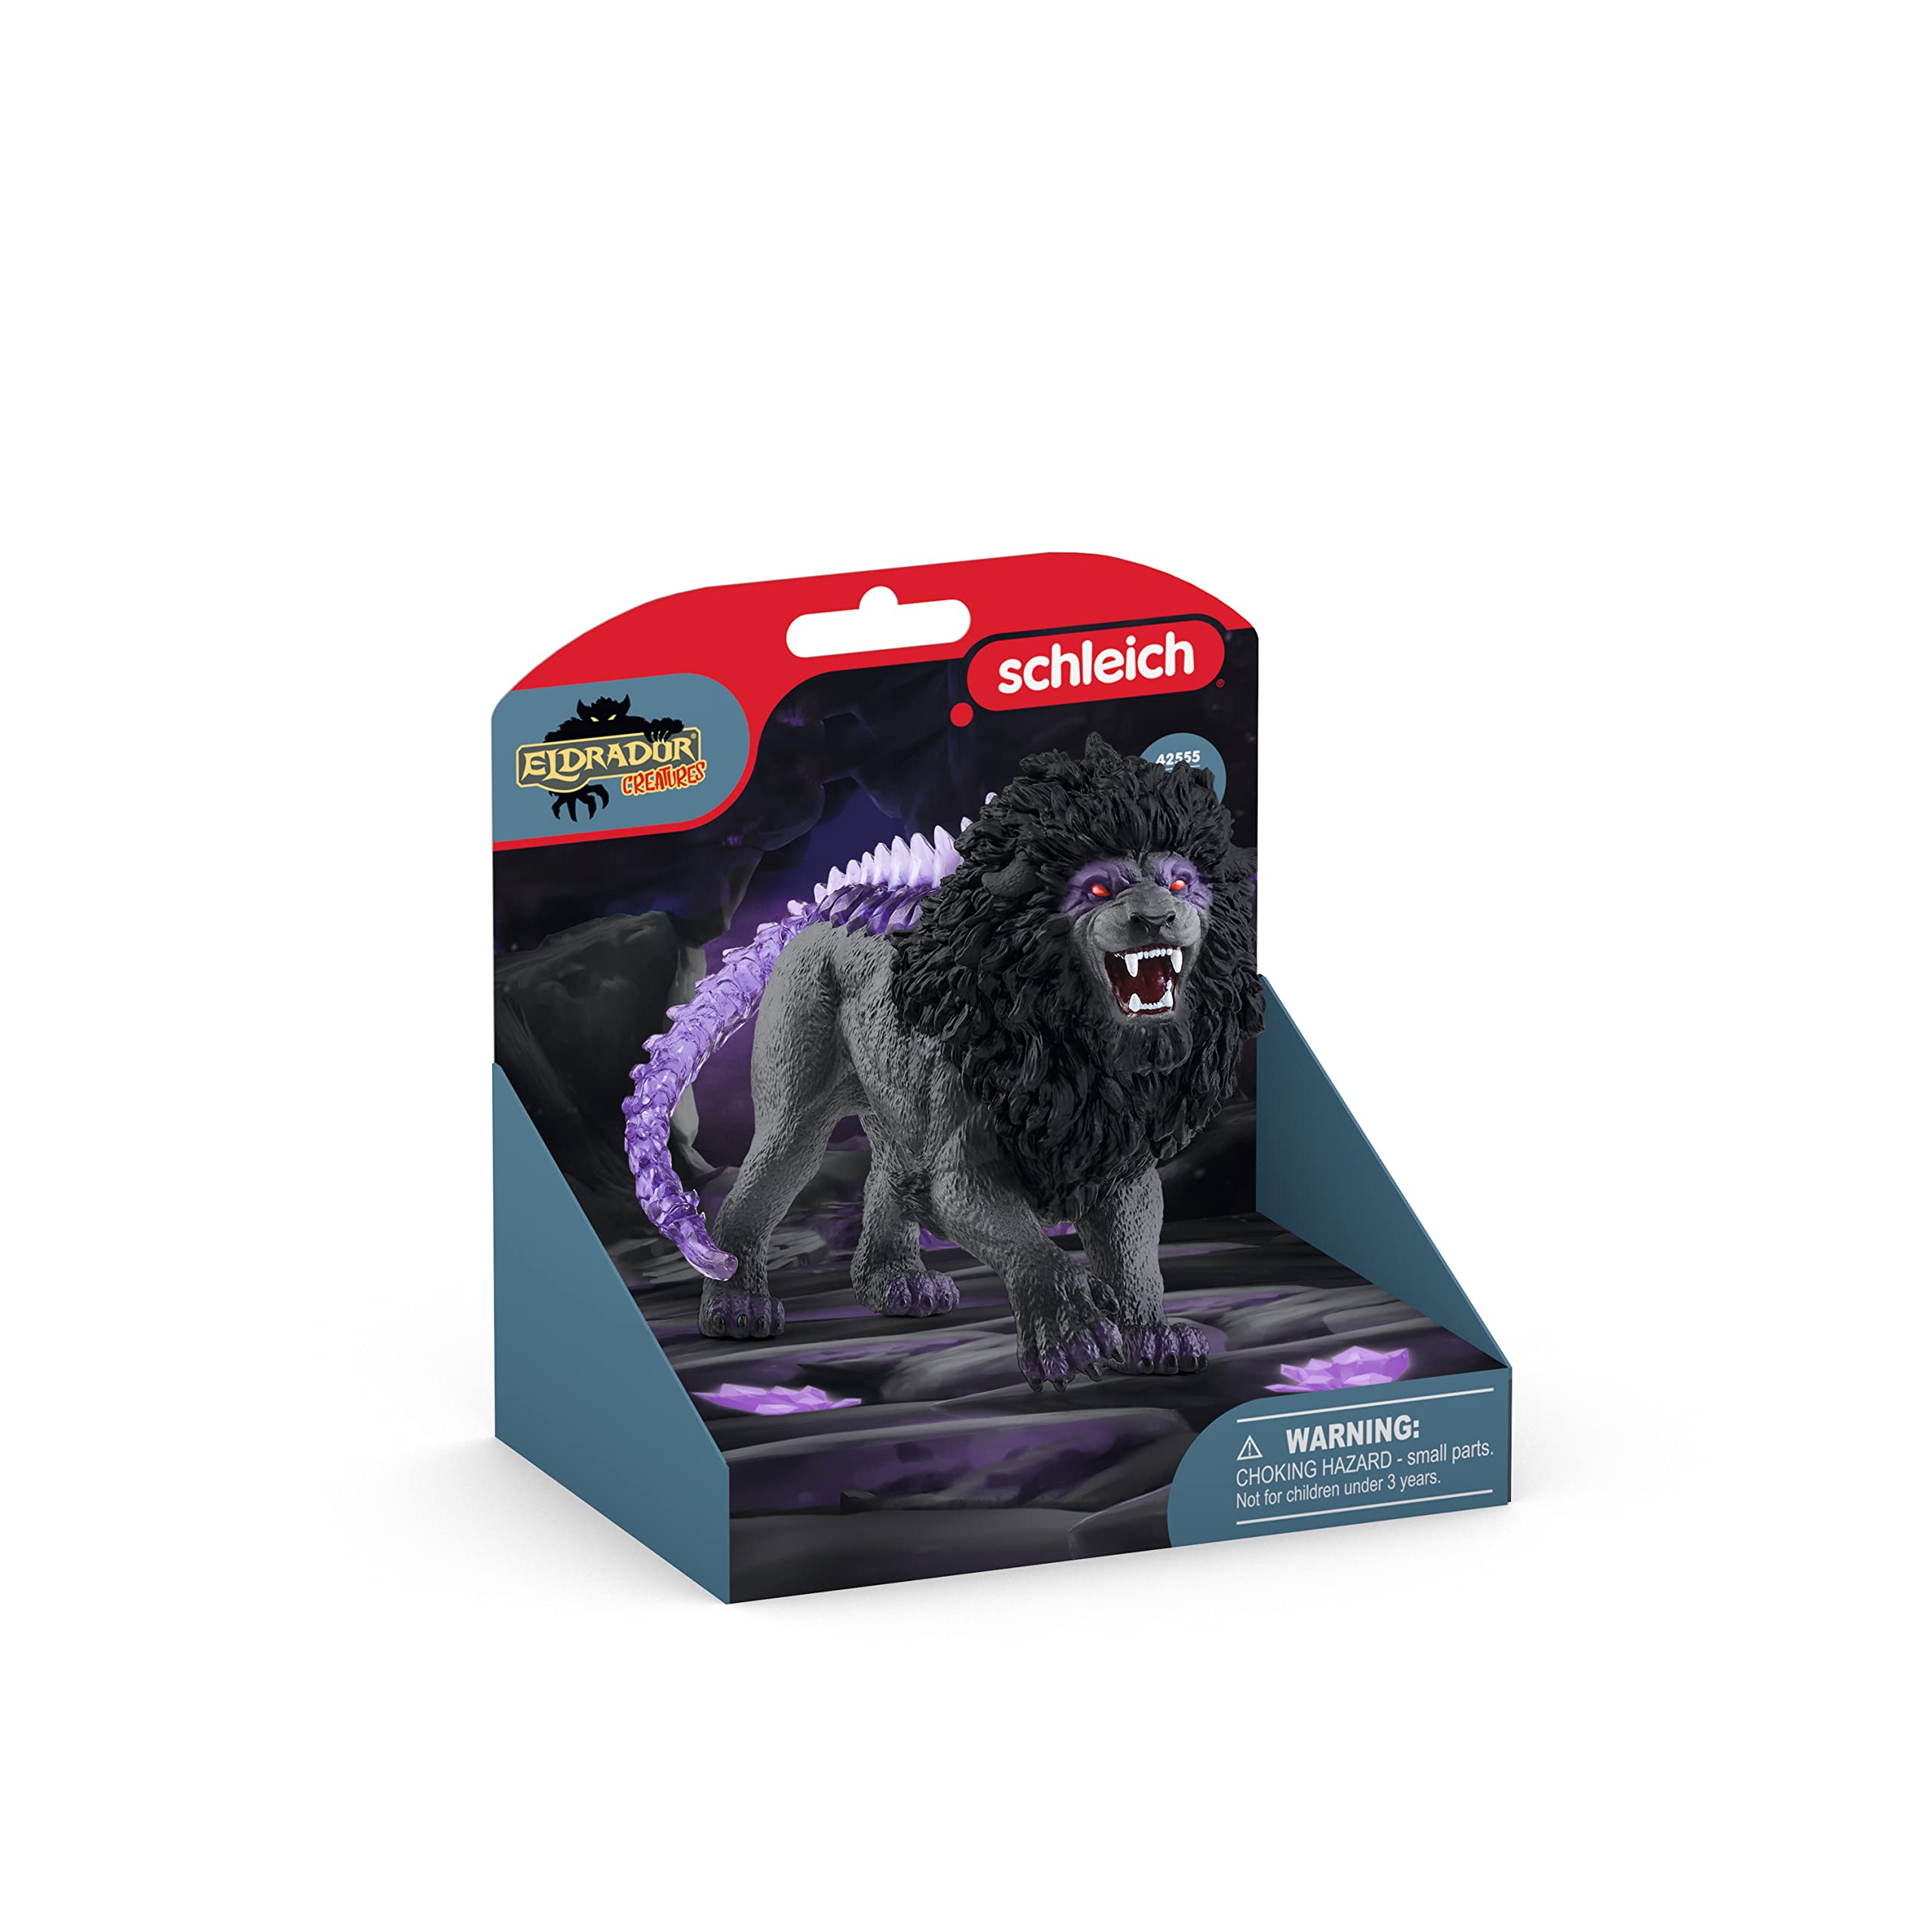 Schleich Eldrador Creatures, Mythical Creatures Toys for Boys and Girls, Shadow Lion Action Figure, Ages 7+